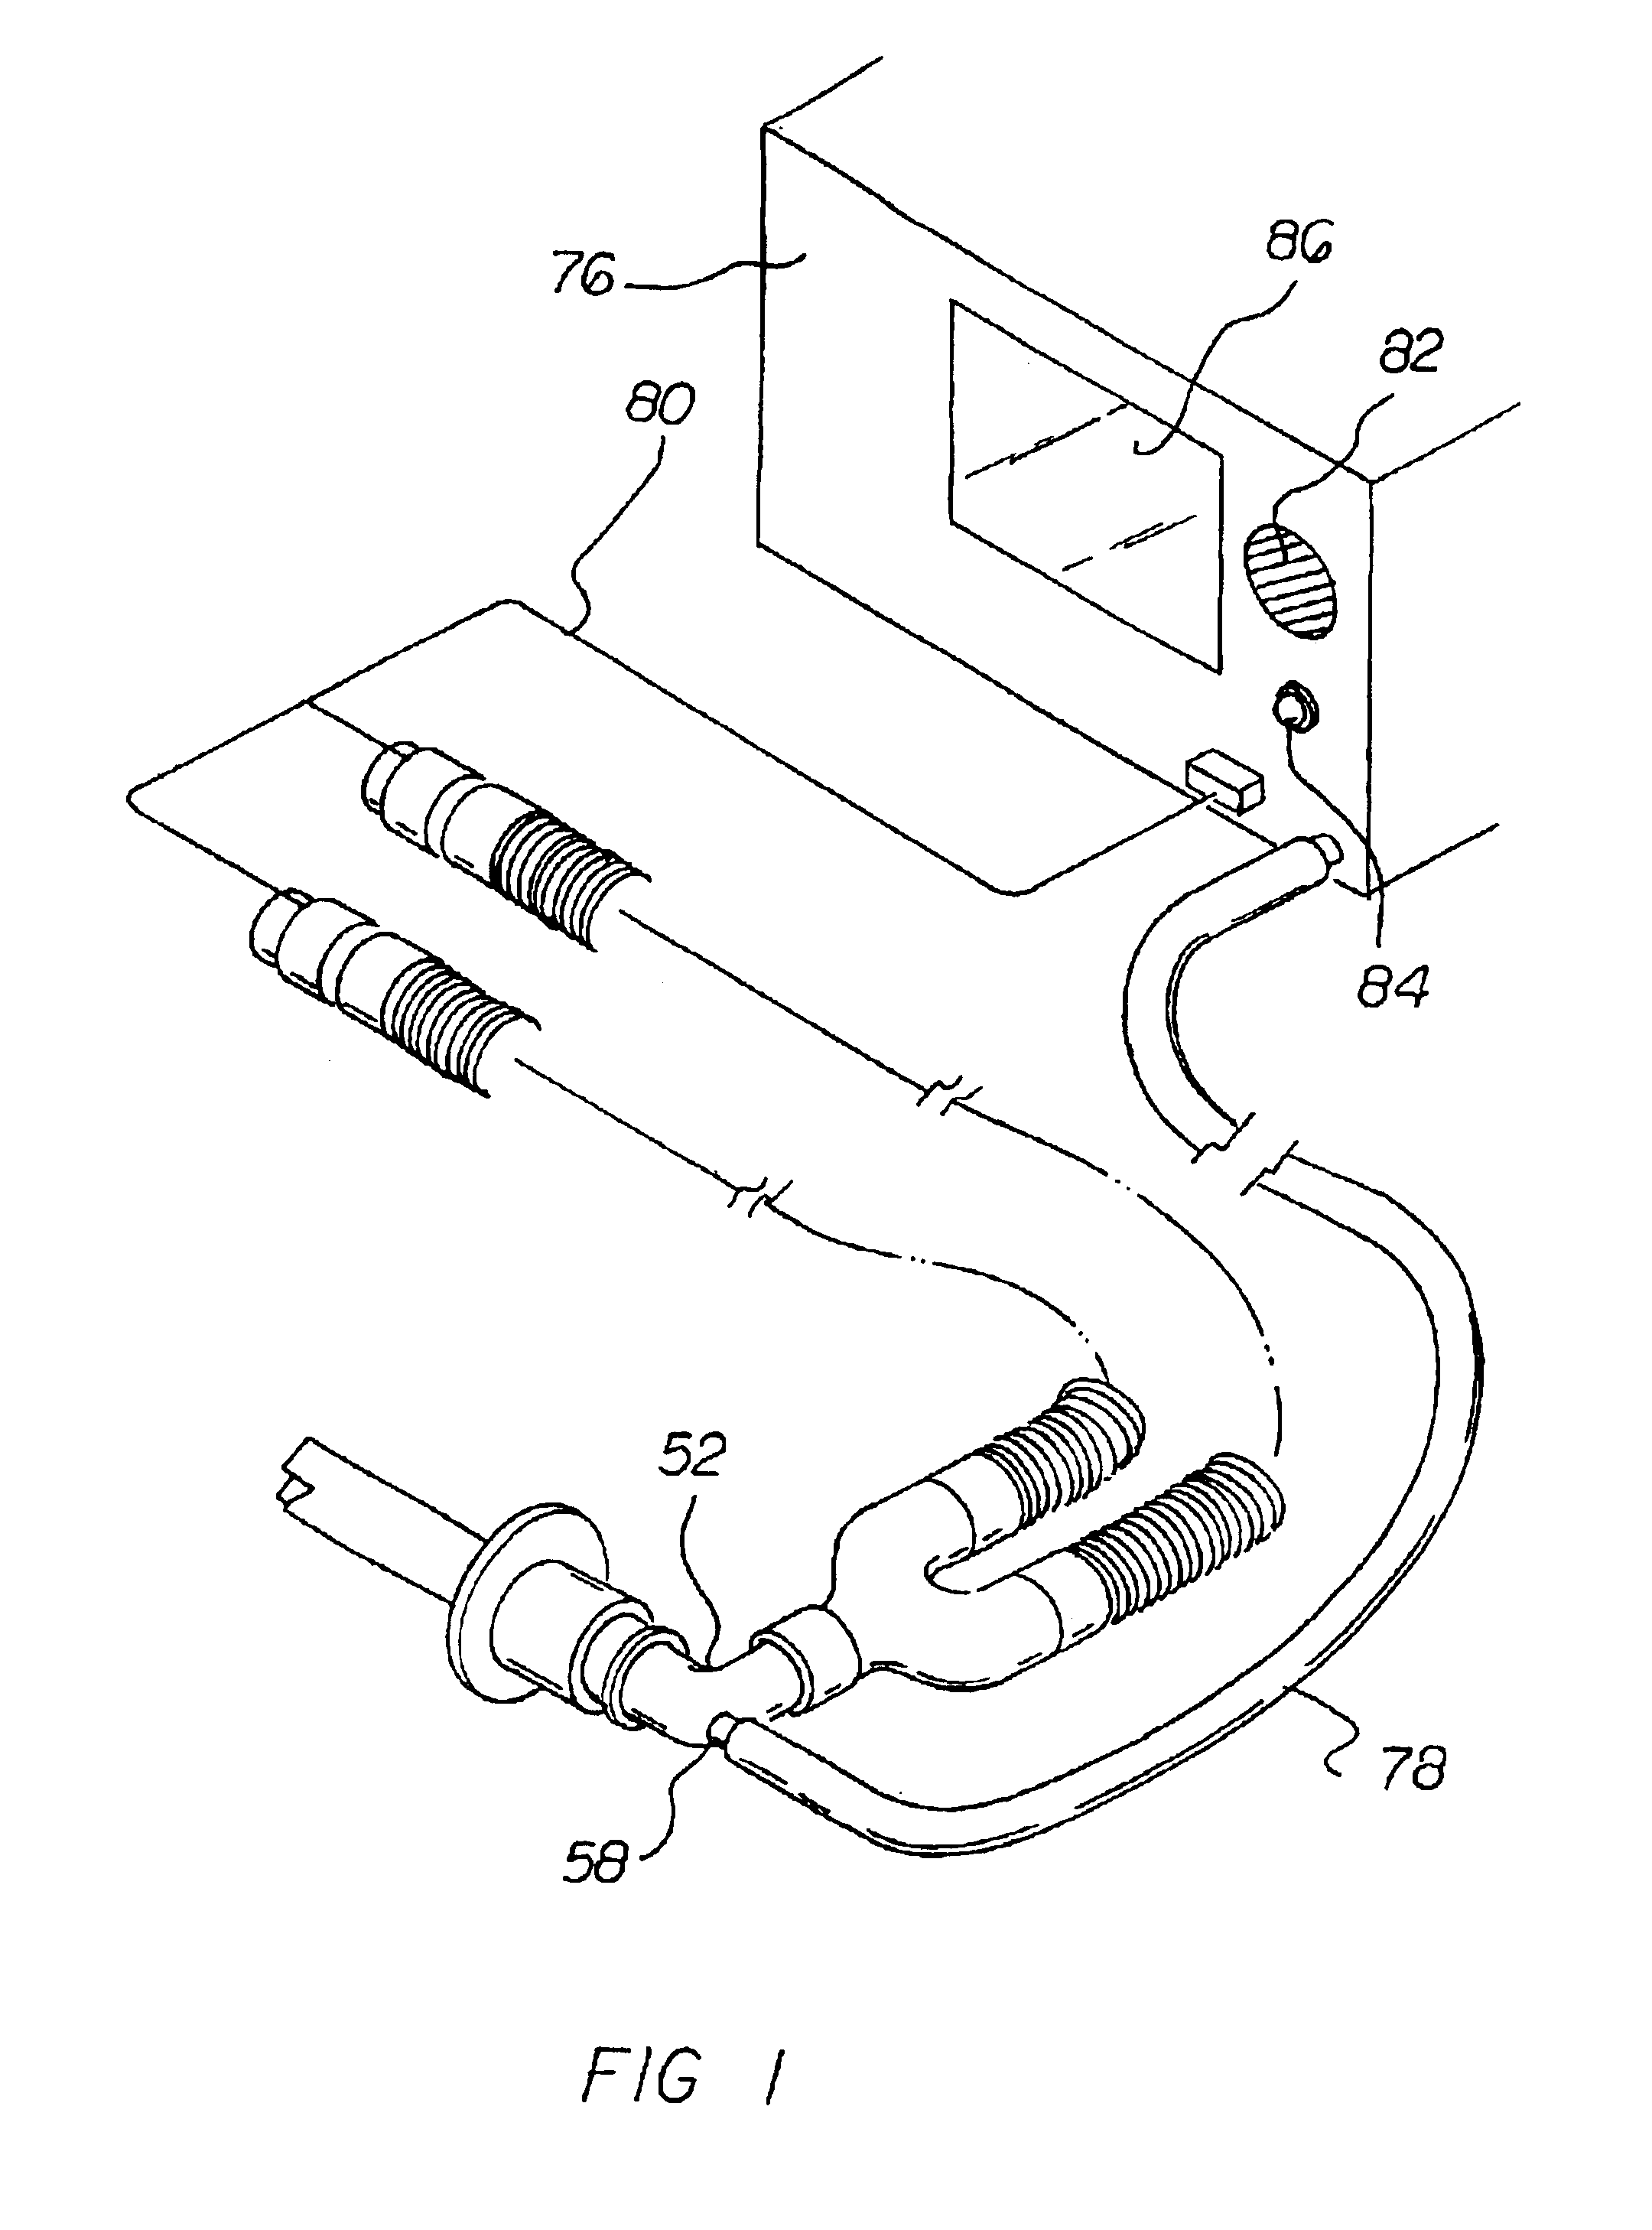 Breathing circuit disconnect warning system and method for using a disconnect system